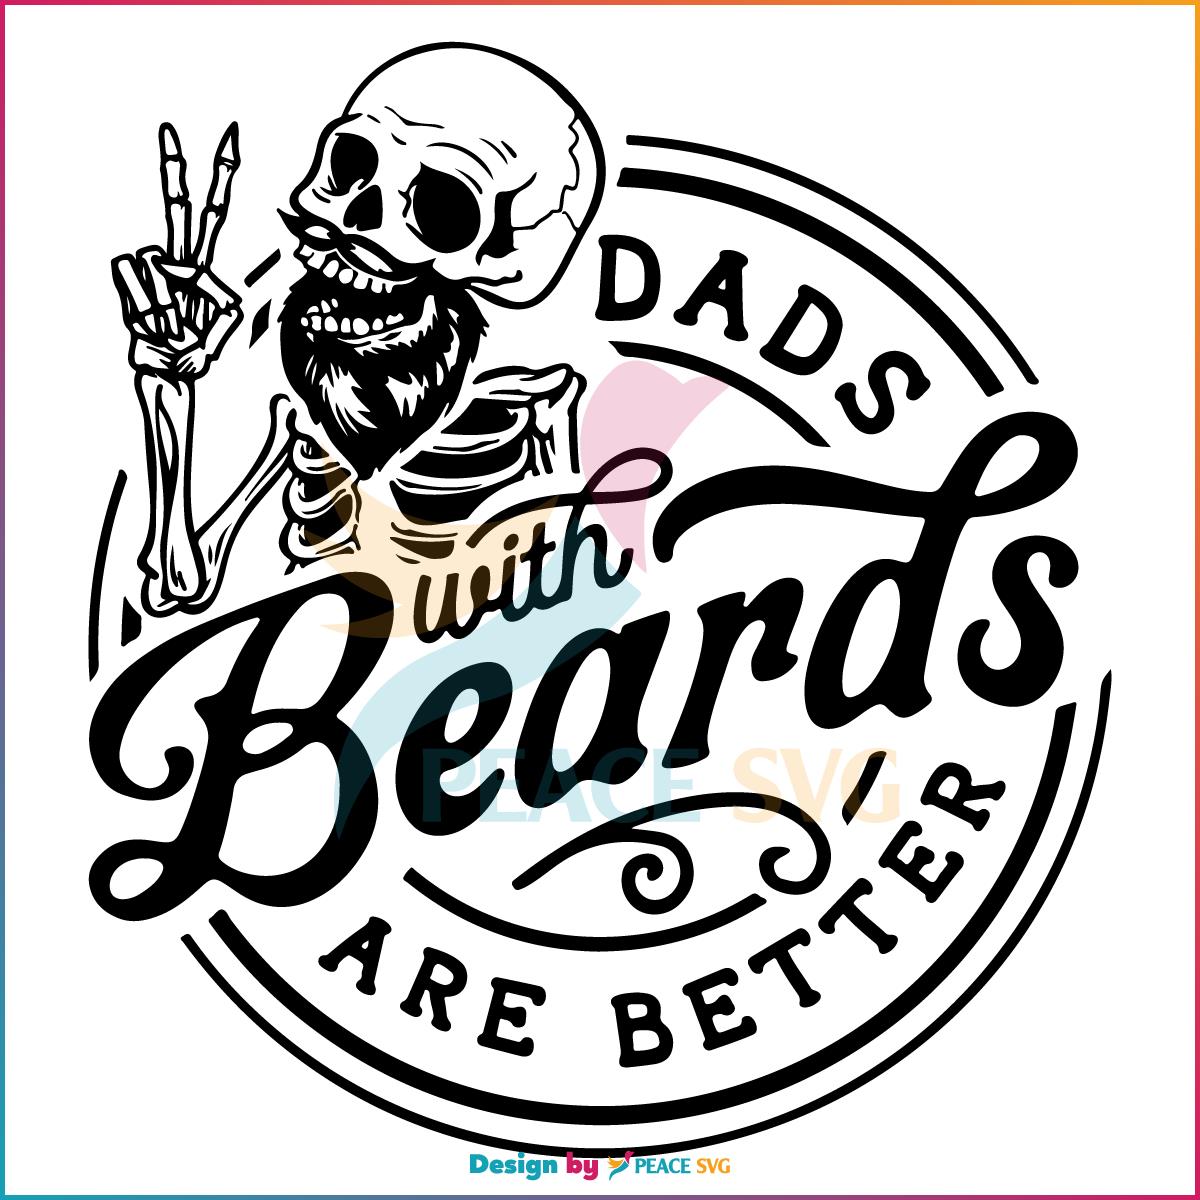 dads-with-beards-are-better-funny-fathers-day-svg-cutting-file